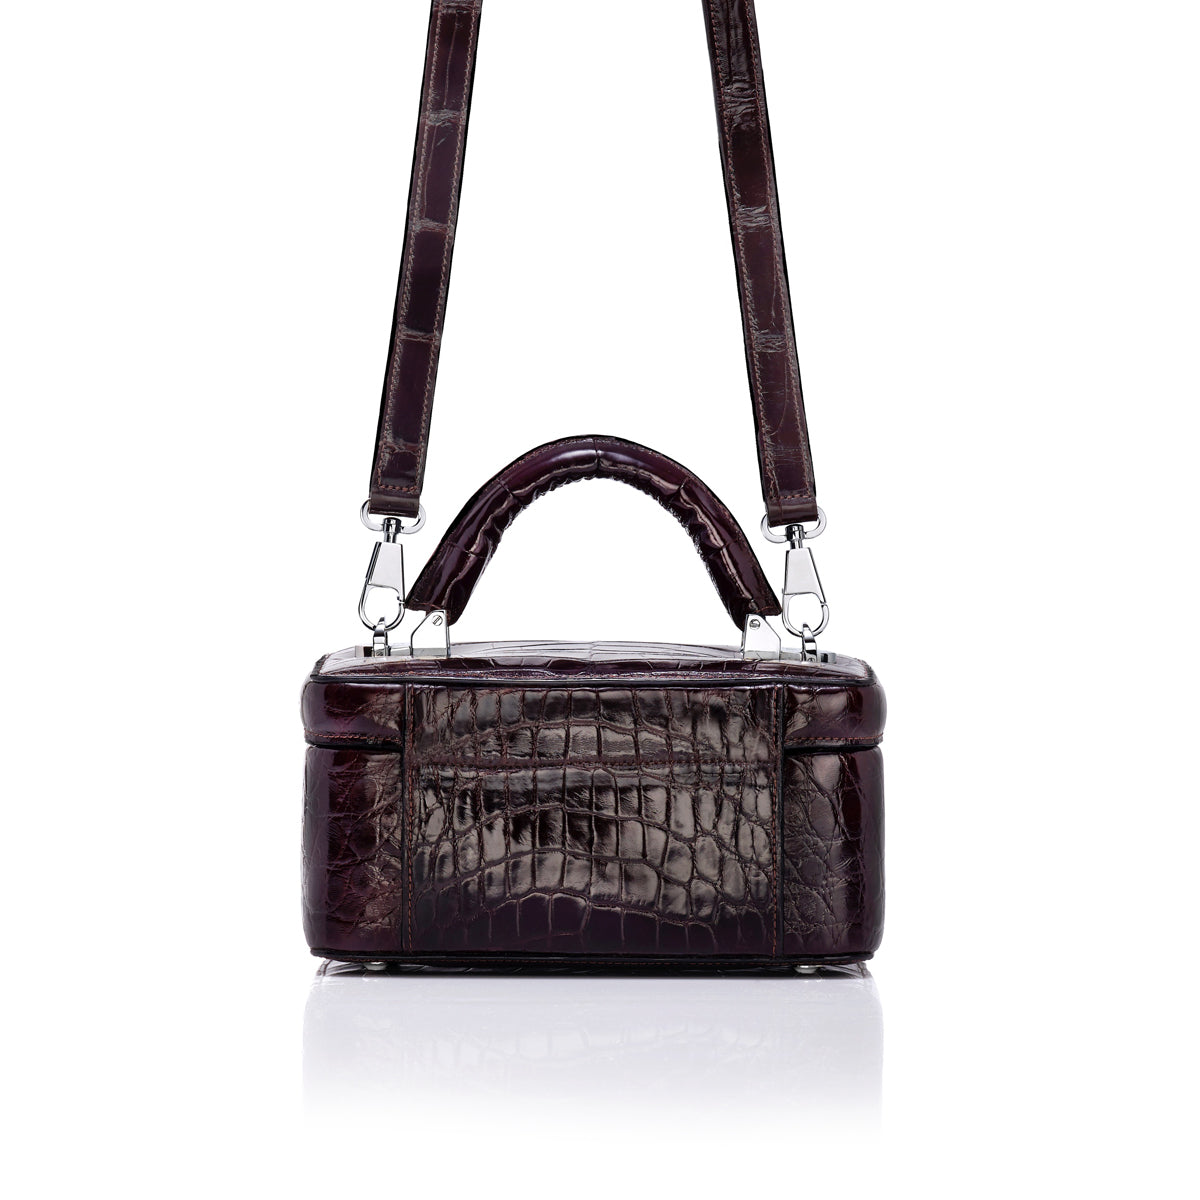 STALVEY Beauty Case in Vamp Alligator Front View